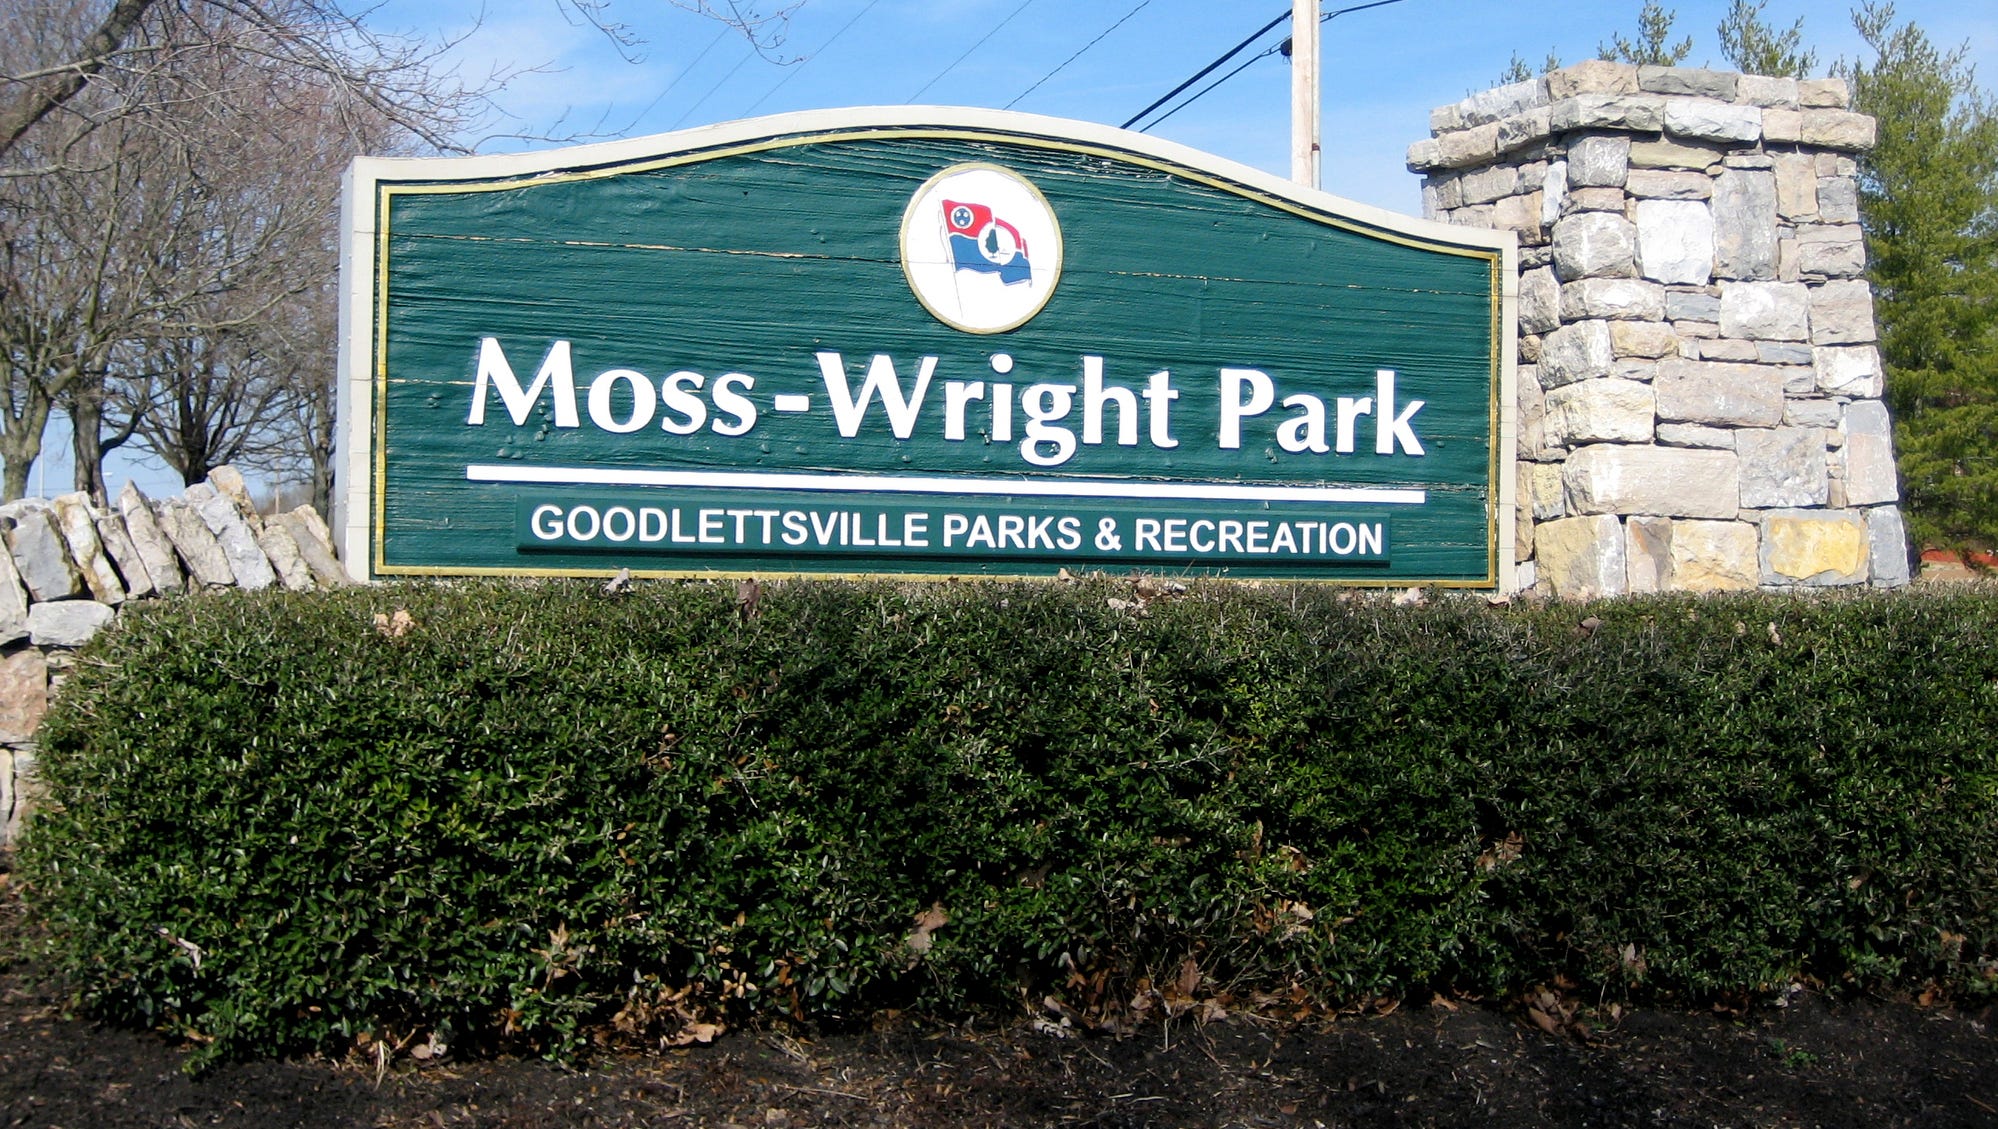 Goodlettsville Gets Grant To Connect Moss Wright North Creek Parks